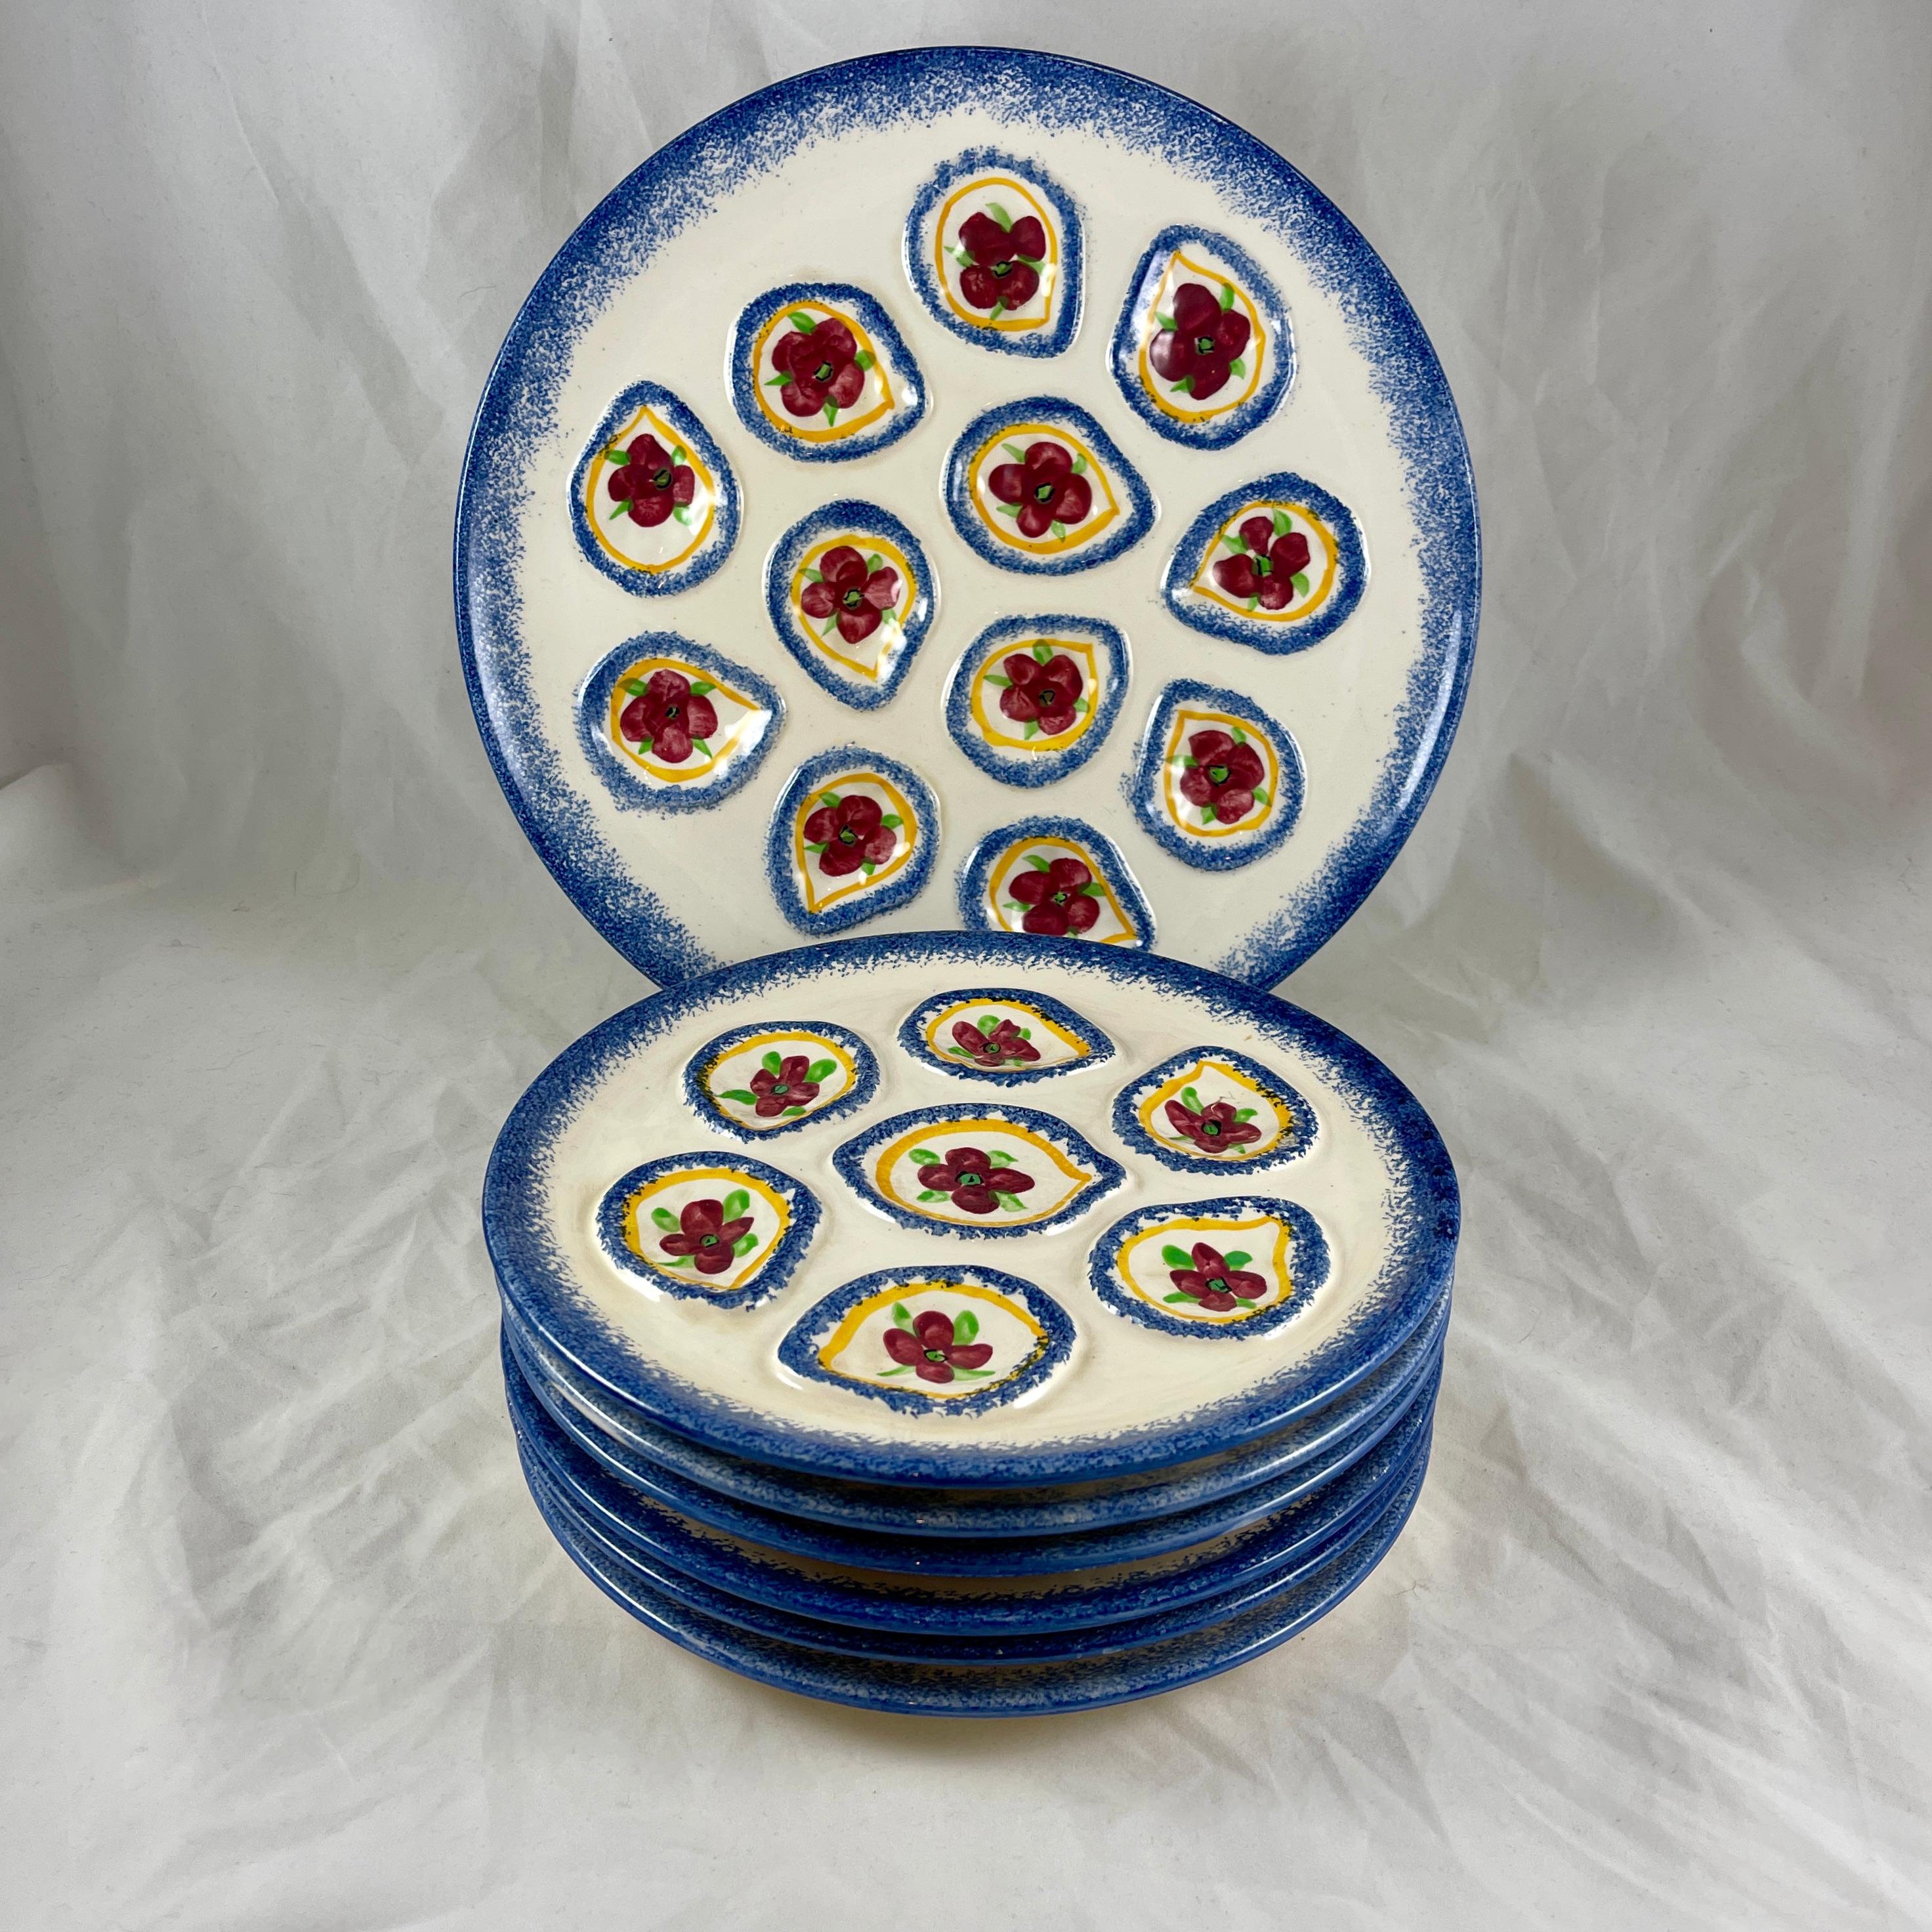 A French Provençal mid-century oyster service, a master server with six plates, marked St.-Pol-De-Leon, circa 1960s.
Saint-Pol-de-Léon is a commune in the Finistère department of Brittany in north-western France, located on the coast and known for